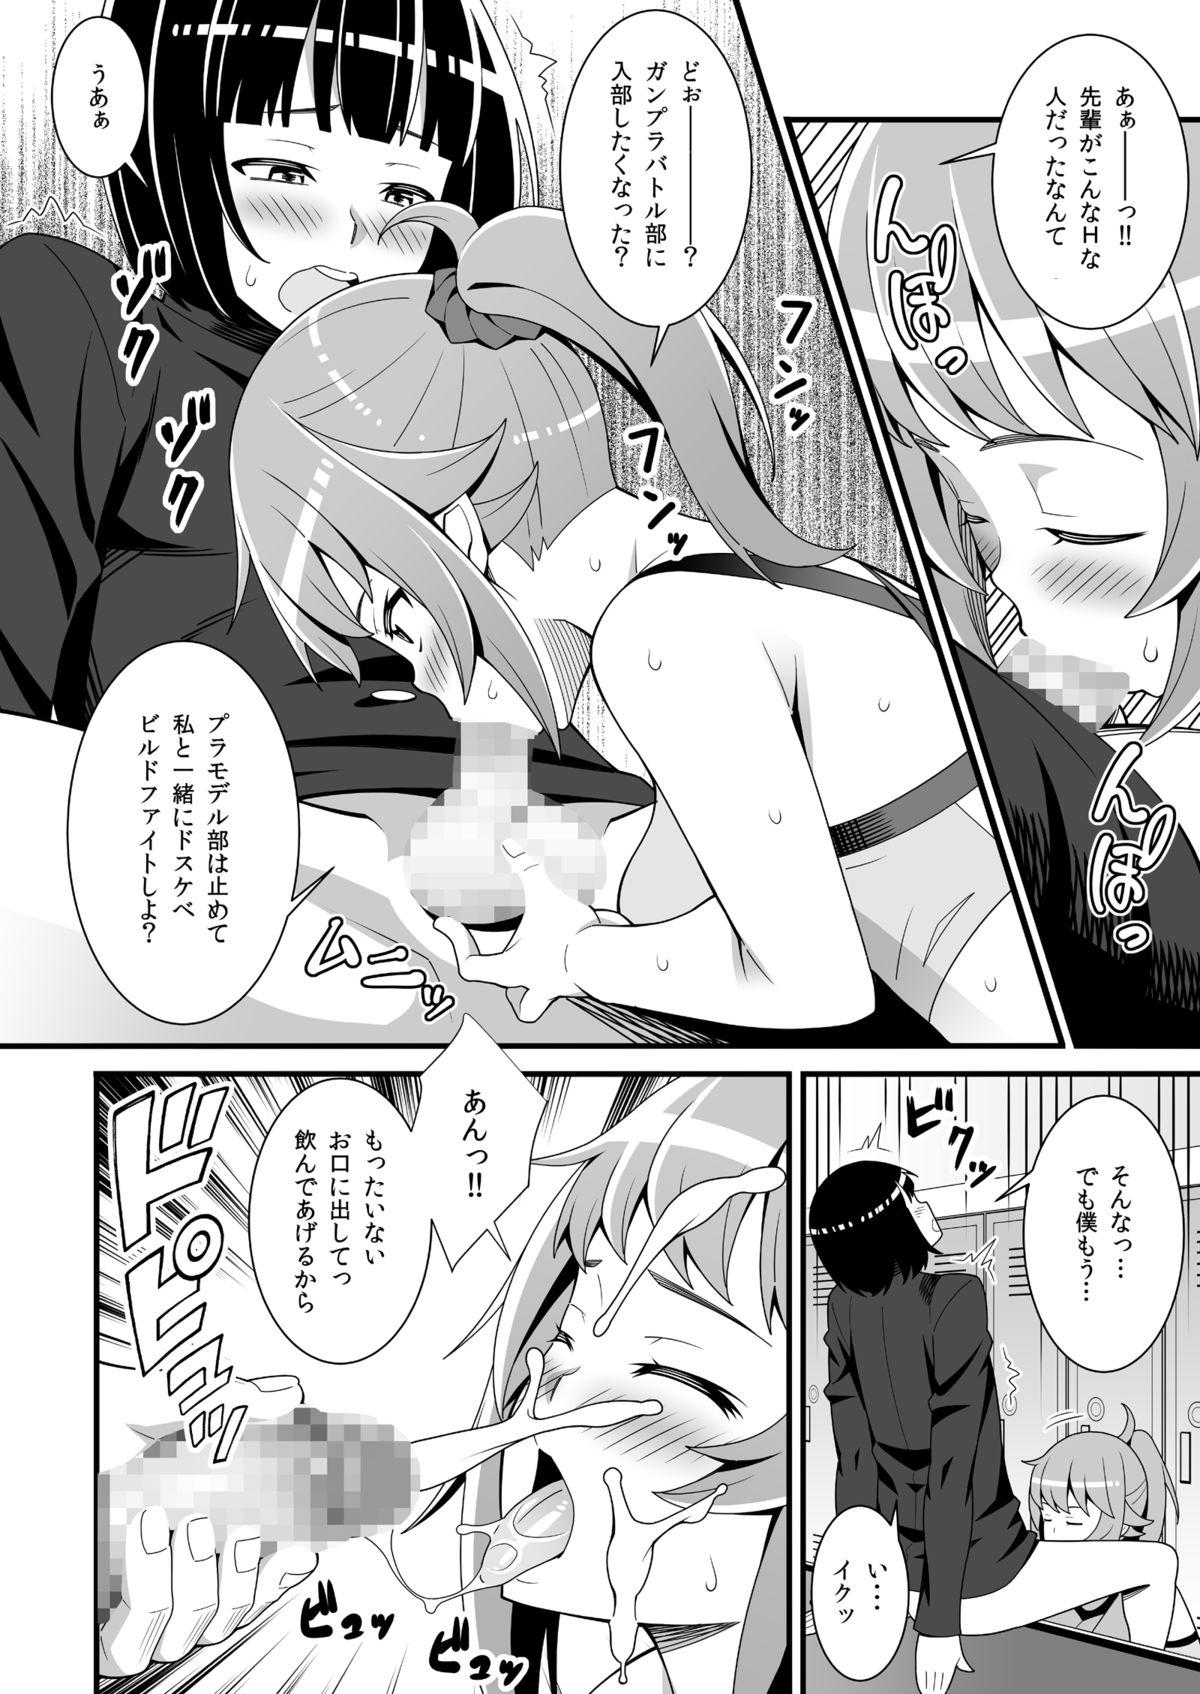 The Buchou no Dosukebe Buin Kanyuu Try - Gundam build fighters try Gayporn - Page 11